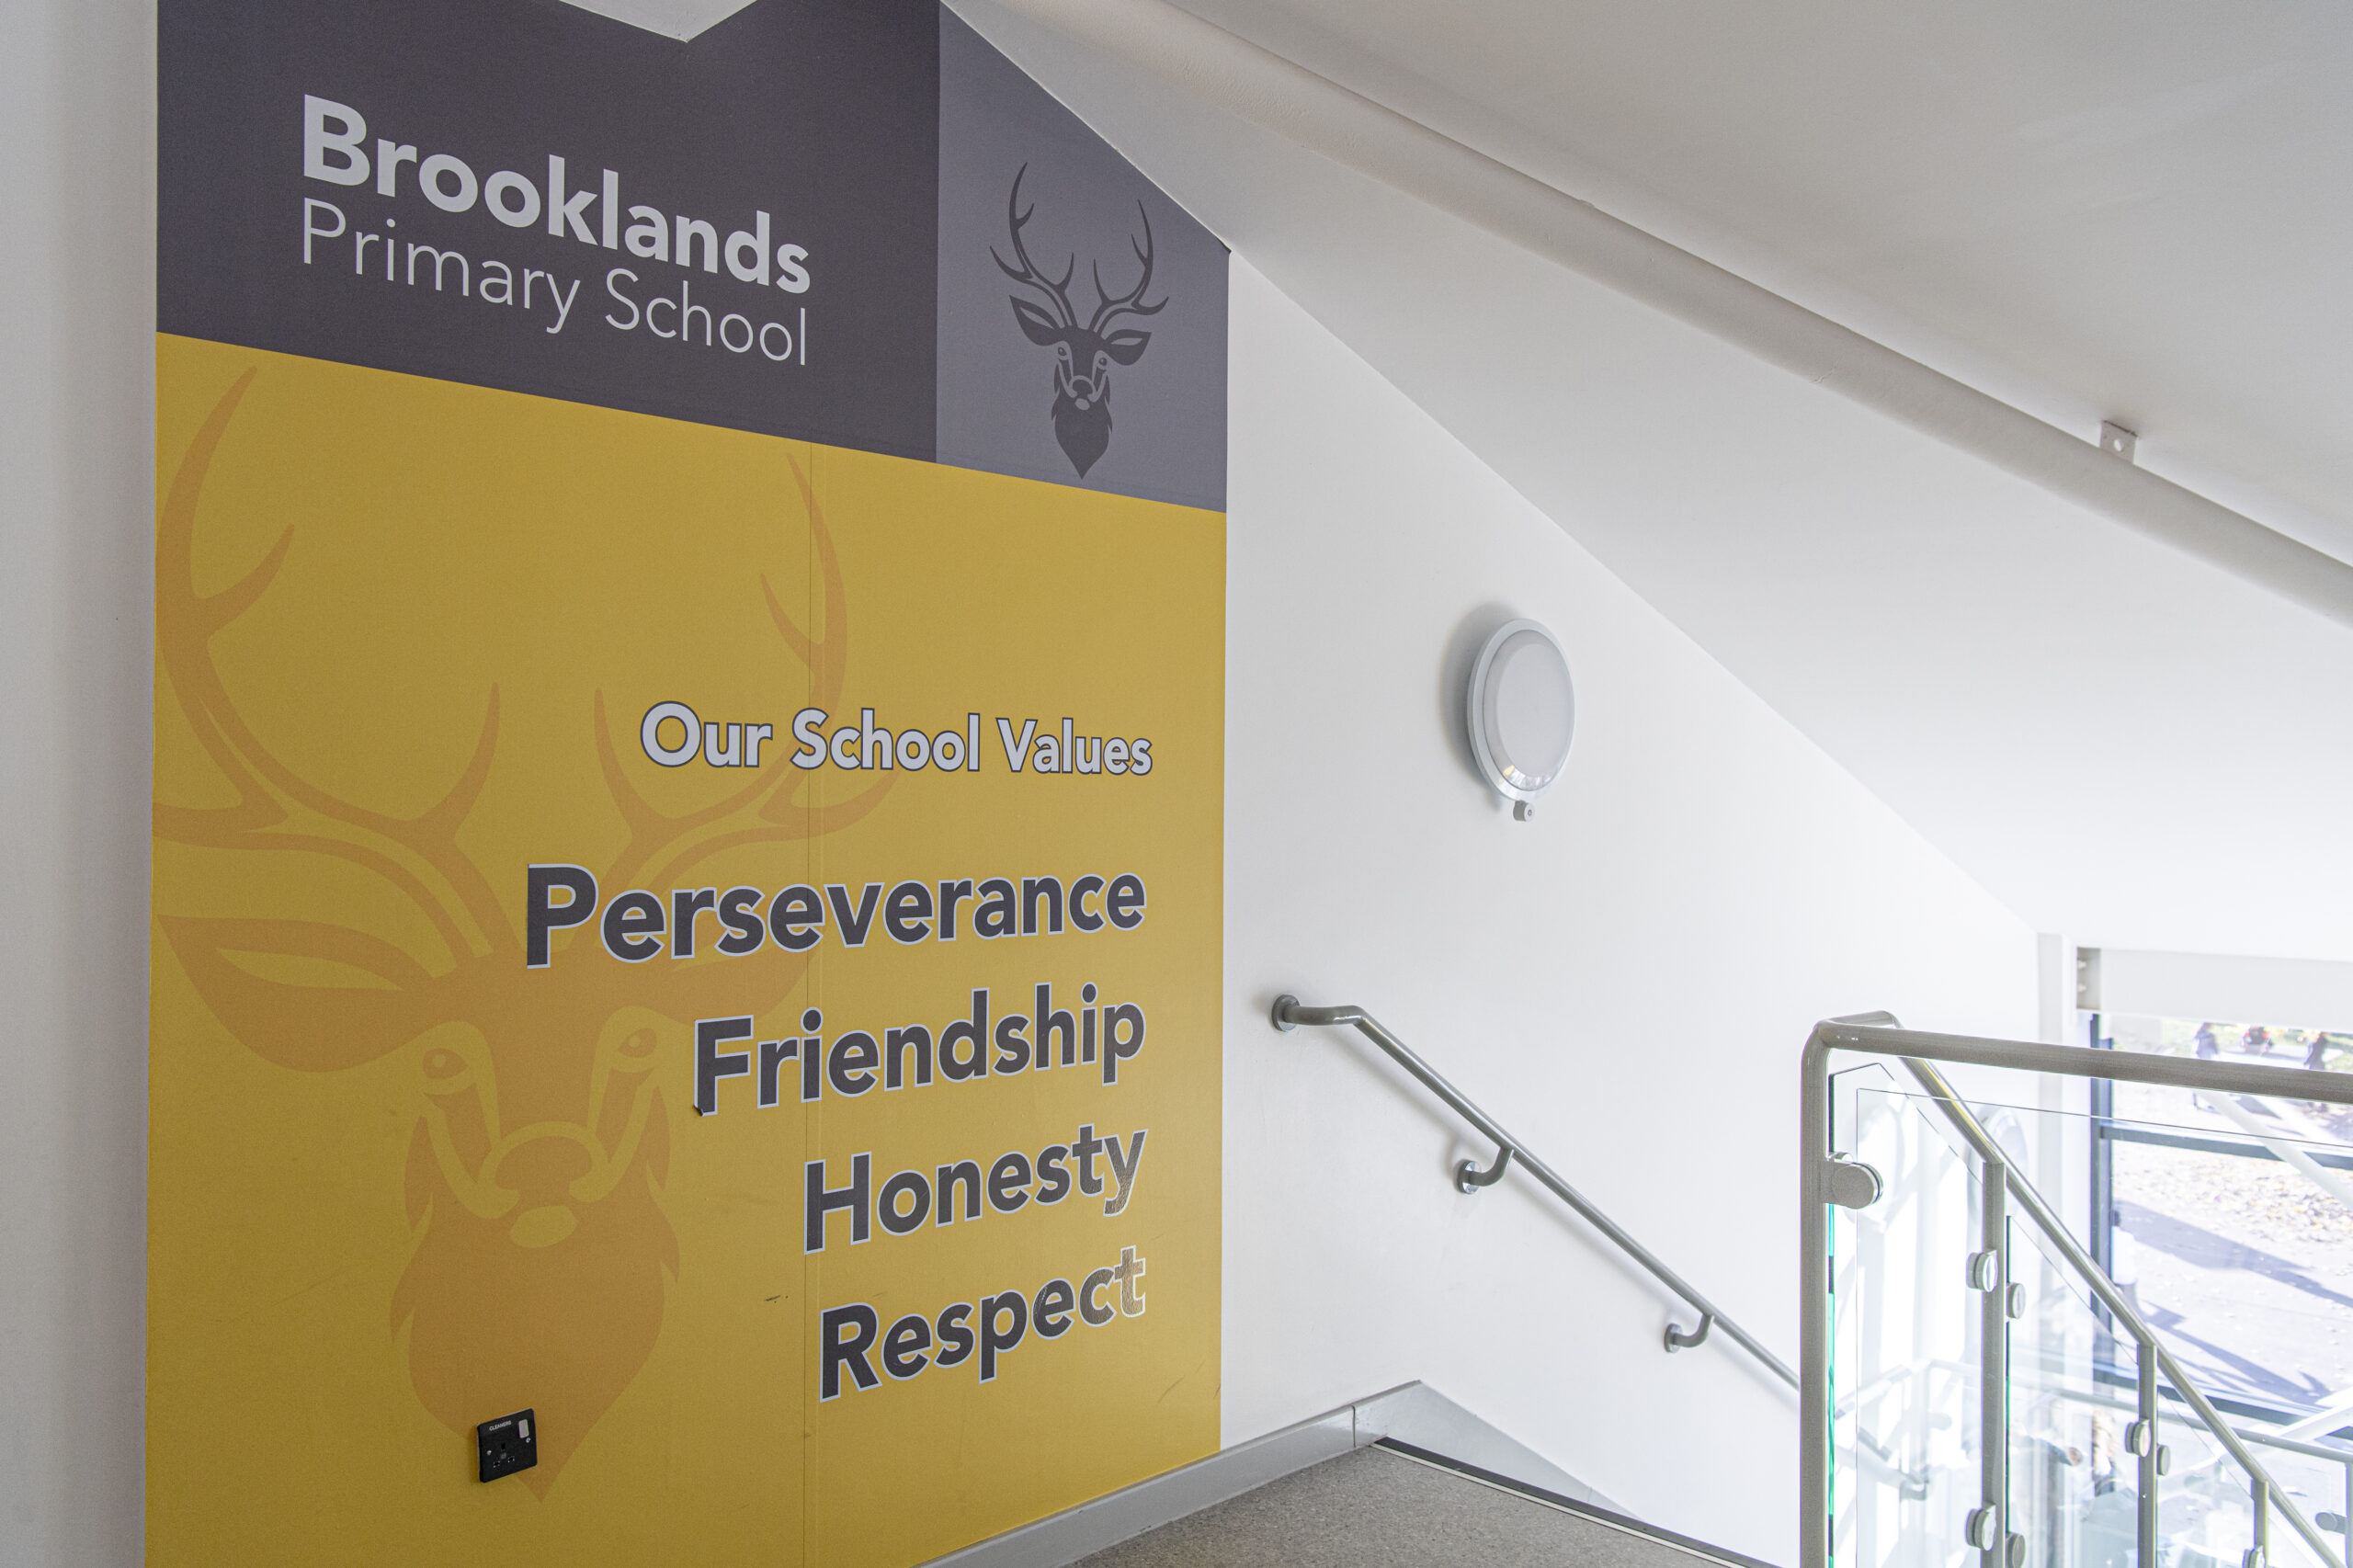 Our School Values